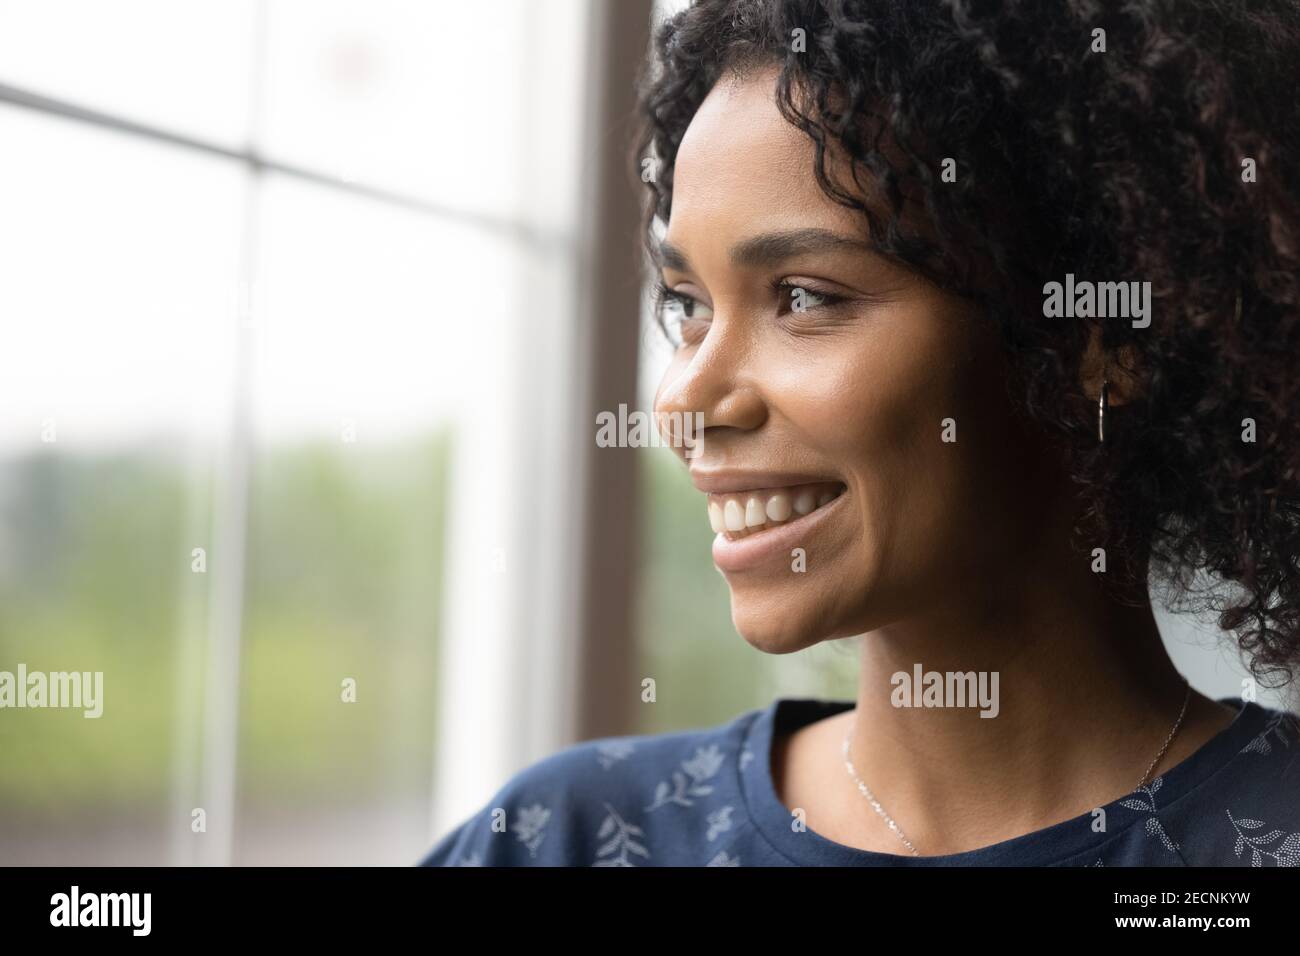 Close Up Dreamy Smiling African American Woman Looking Out Window 